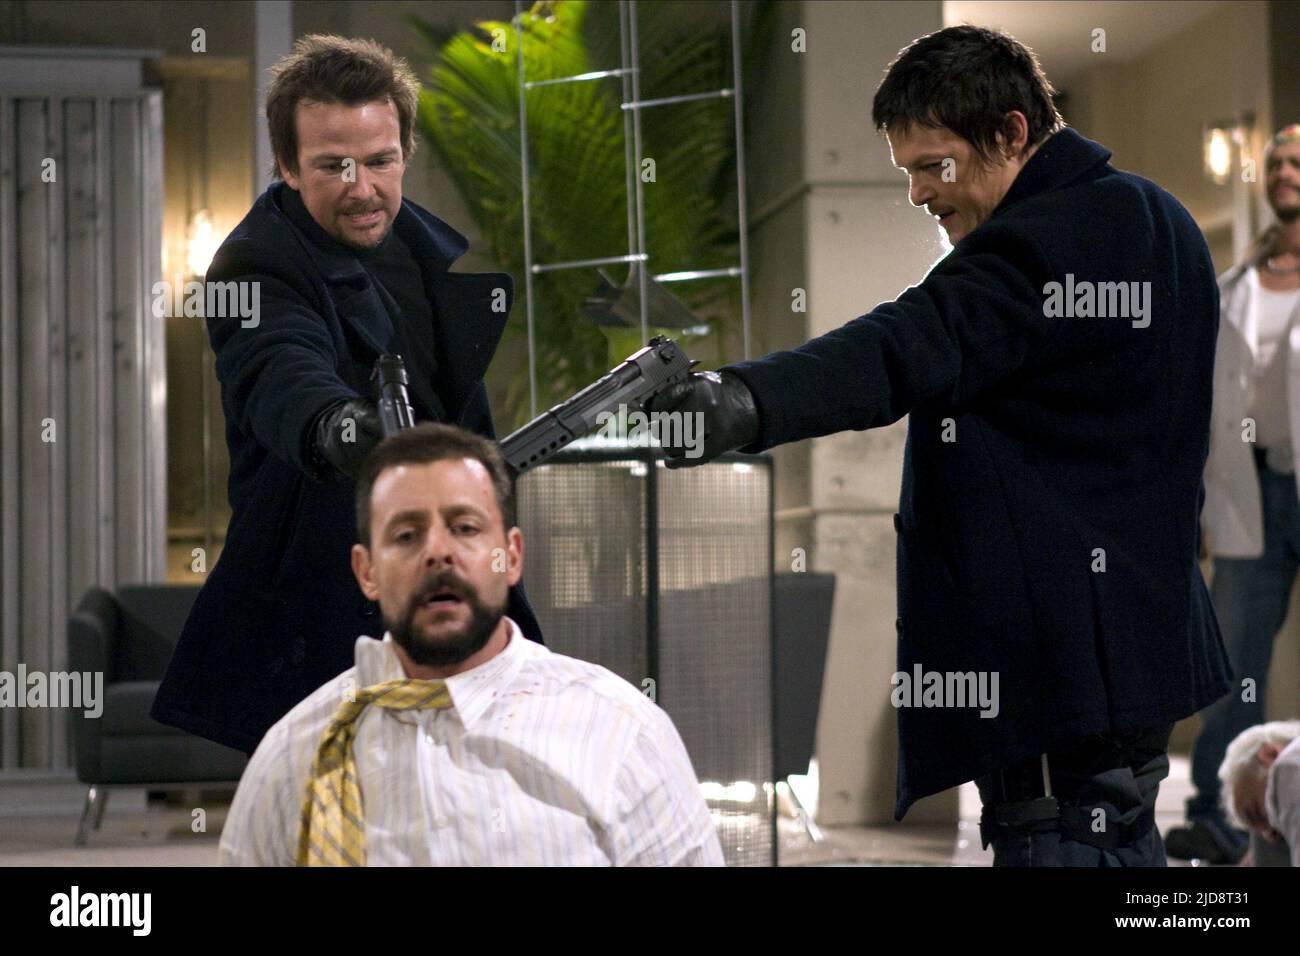 FLANERY,NELSON,REEDUS, THE BOONDOCK SAINTS II: ALL SAINTS DAY, 2009, Banque D'Images